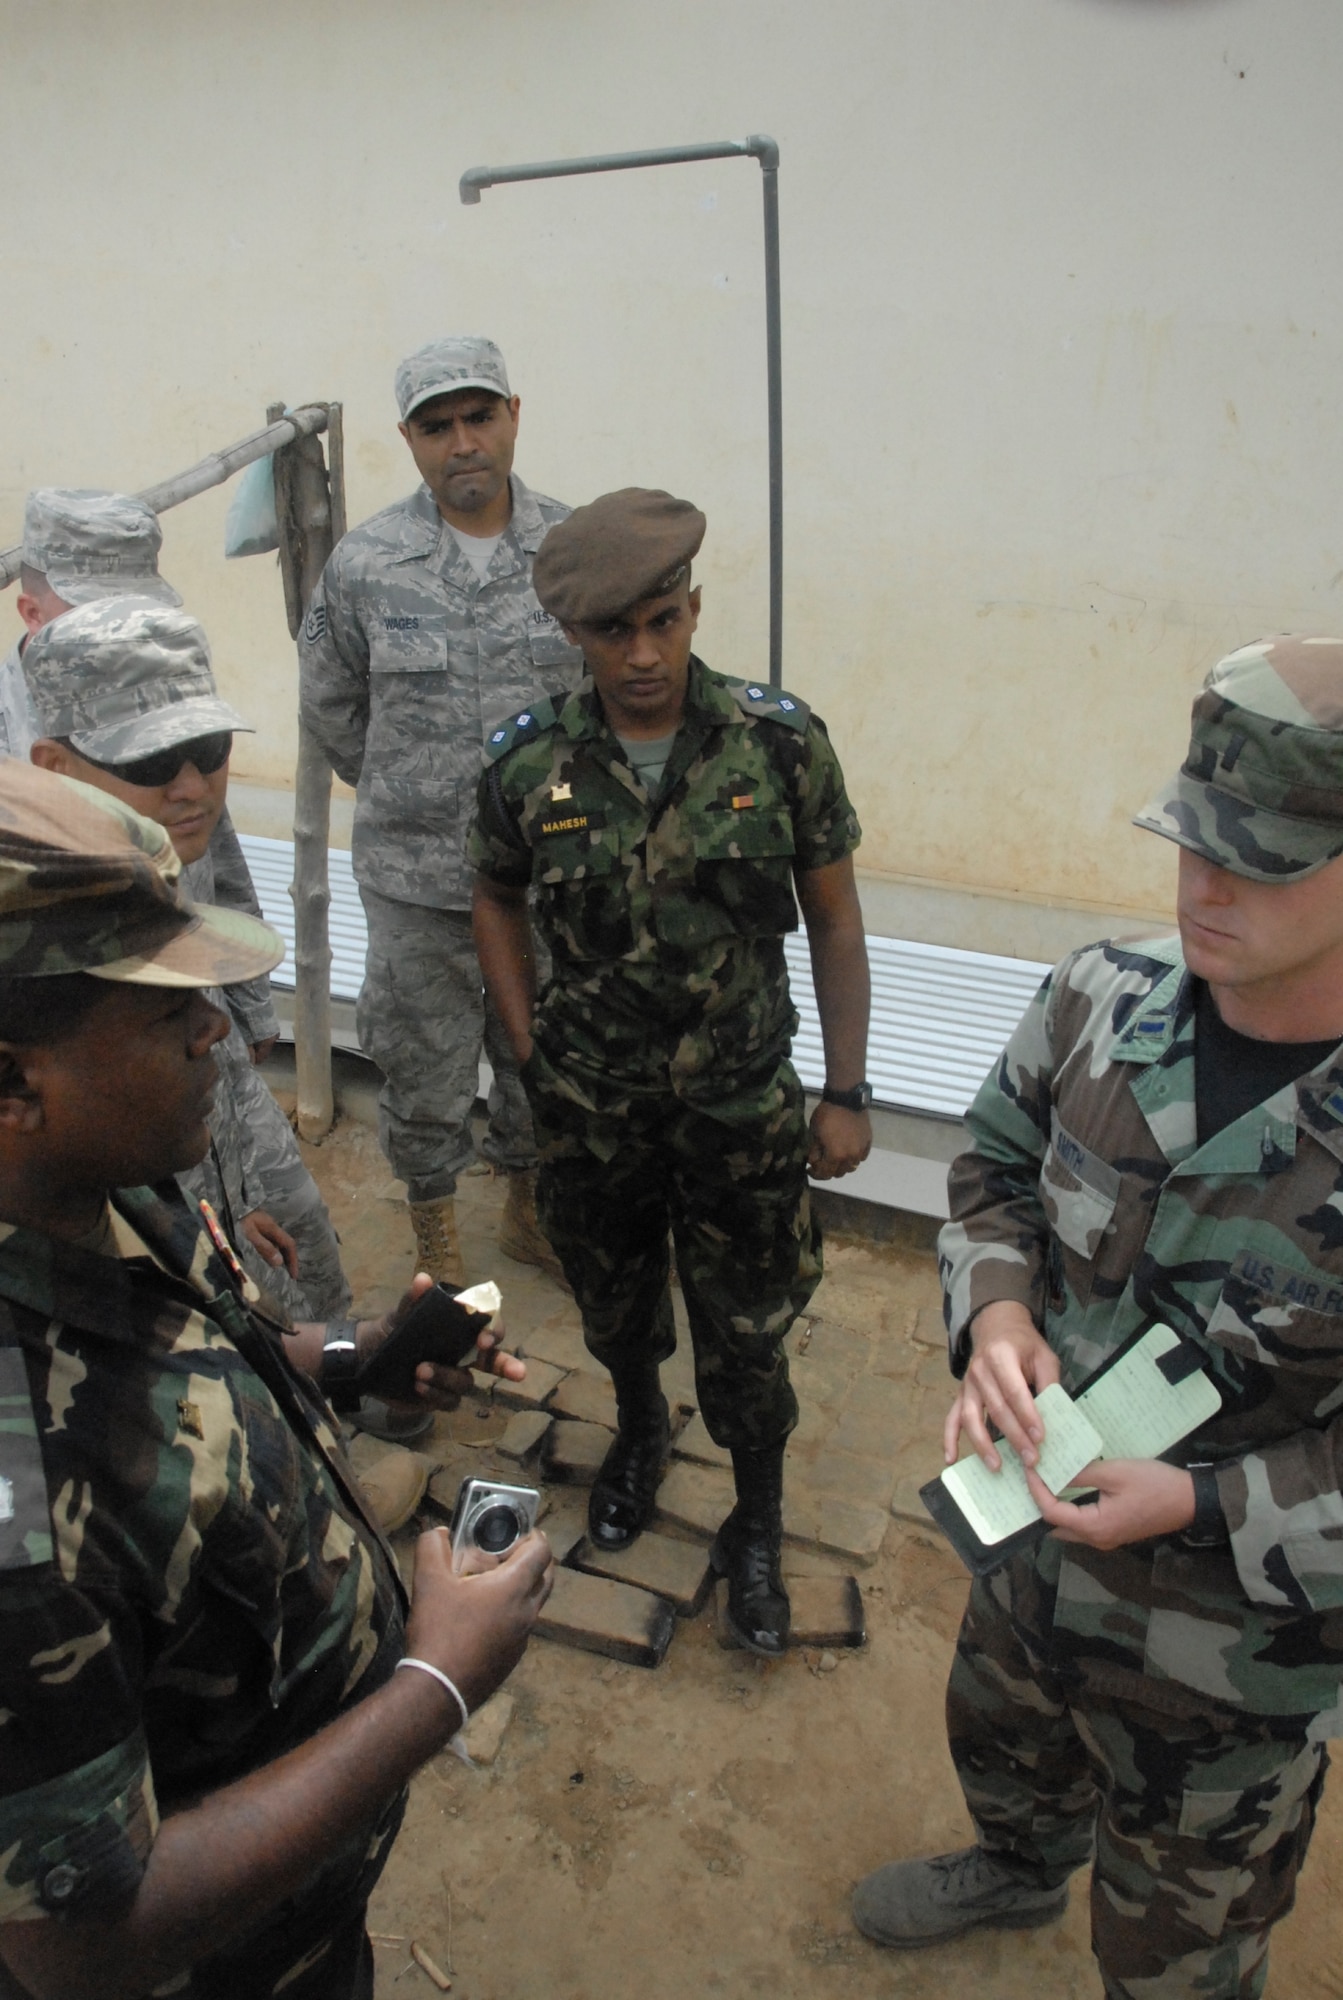 U.S. Air Force 1st Lt. Logan Smith discusses plans to improve an outdoor shower with Sri Lankan Army officials prior to beginning work on a school in Puttalam Township, Sri Lanka,  on Aug. 16, 2010. Lieutenant Smith and more than 40 servicemembers joined Sri Lankan, Maldives, and Mongolian representatives in participating in Pacific Angel-Sri Lanka. Operation Pacific Angel is a joint and combined humanitarian assistance operation conducted in the Pacific area of responsibility to support U.S. Pacific Command's capacity-building efforts. This humanitarian and civic assistance program is aimed at improving military civic cooperation between the United States and countries throughout the Asia-Pacific region. Pacific Angel 2010 is scheduled through August 22. (U.S. Air Force photo/Master Sgt. Mike Hammond)